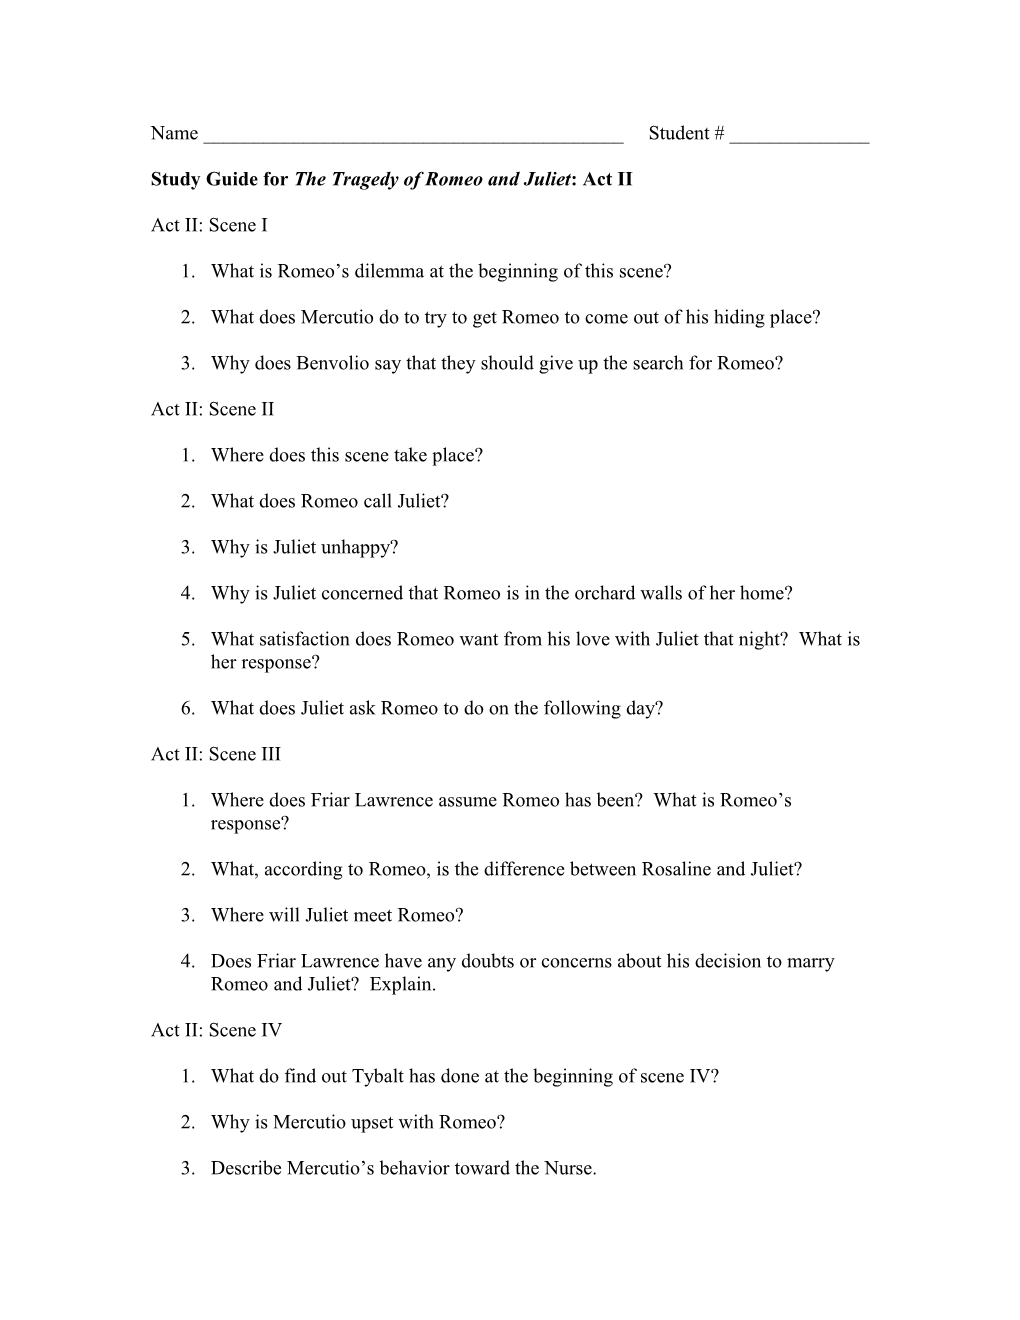 Study Guide for the Tragedy of Romeo and Juliet: Act II